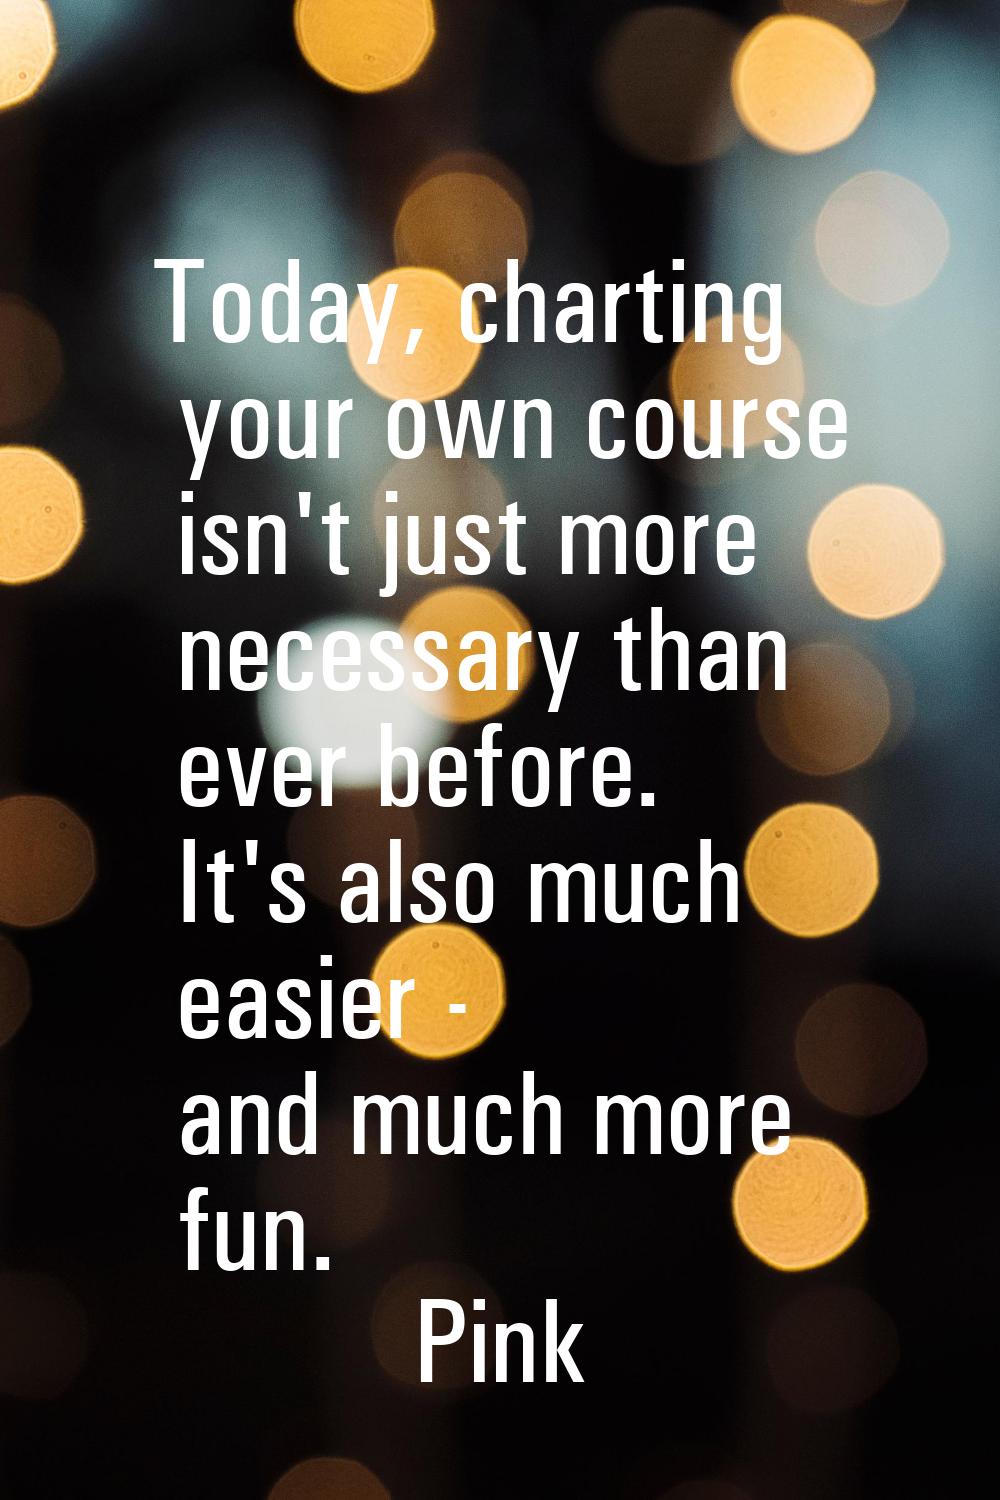 Today, charting your own course isn't just more necessary than ever before. It's also much easier -